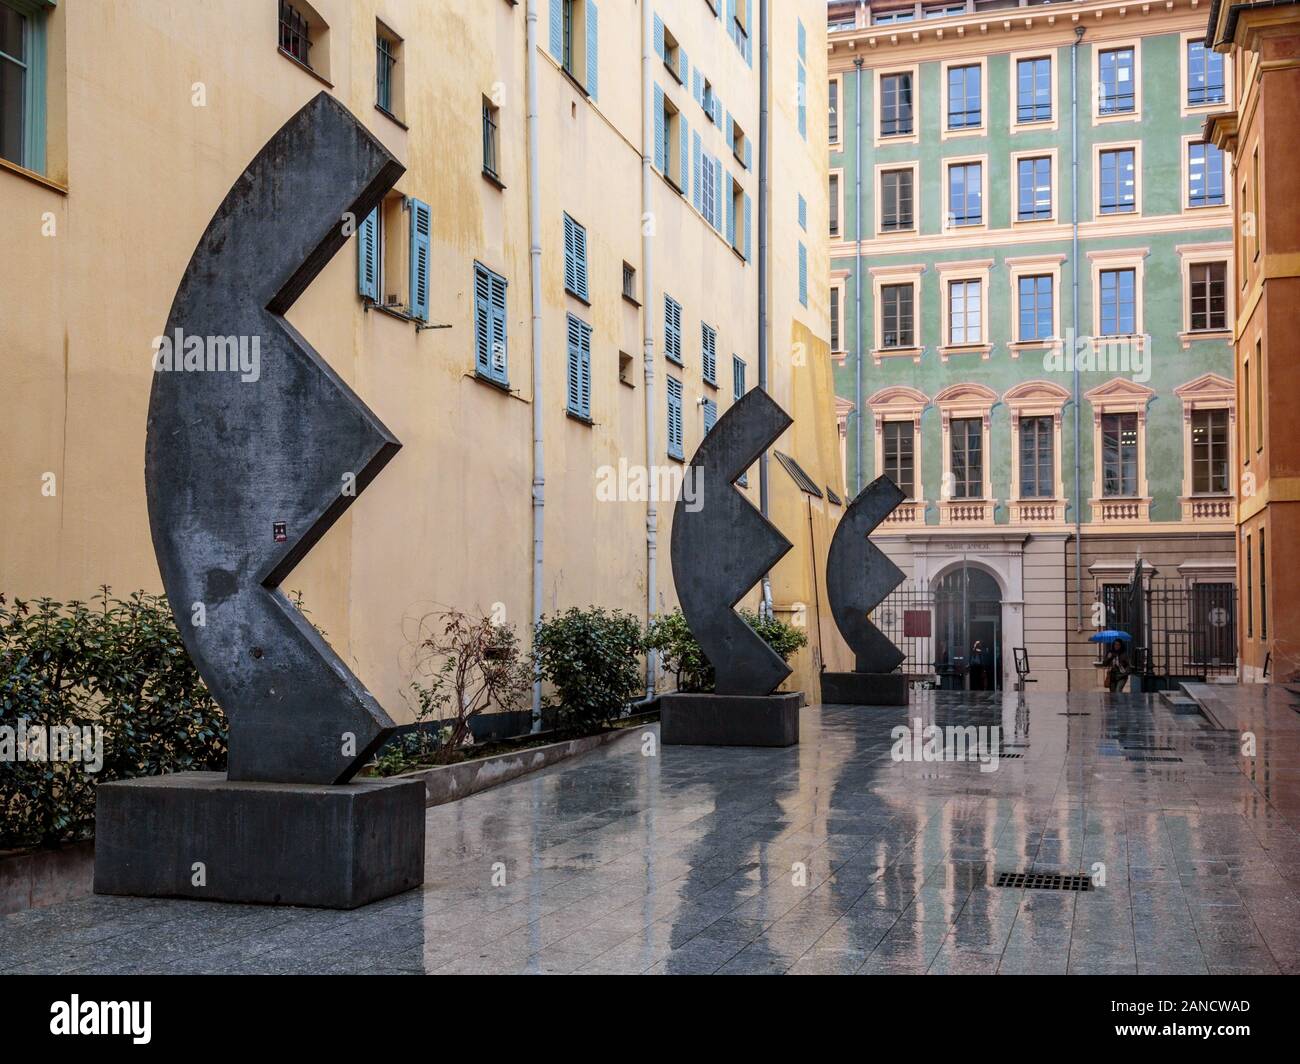 Sculptures in the centre of Nice, French Riviera, Cote d'Azur, France. Stock Photo